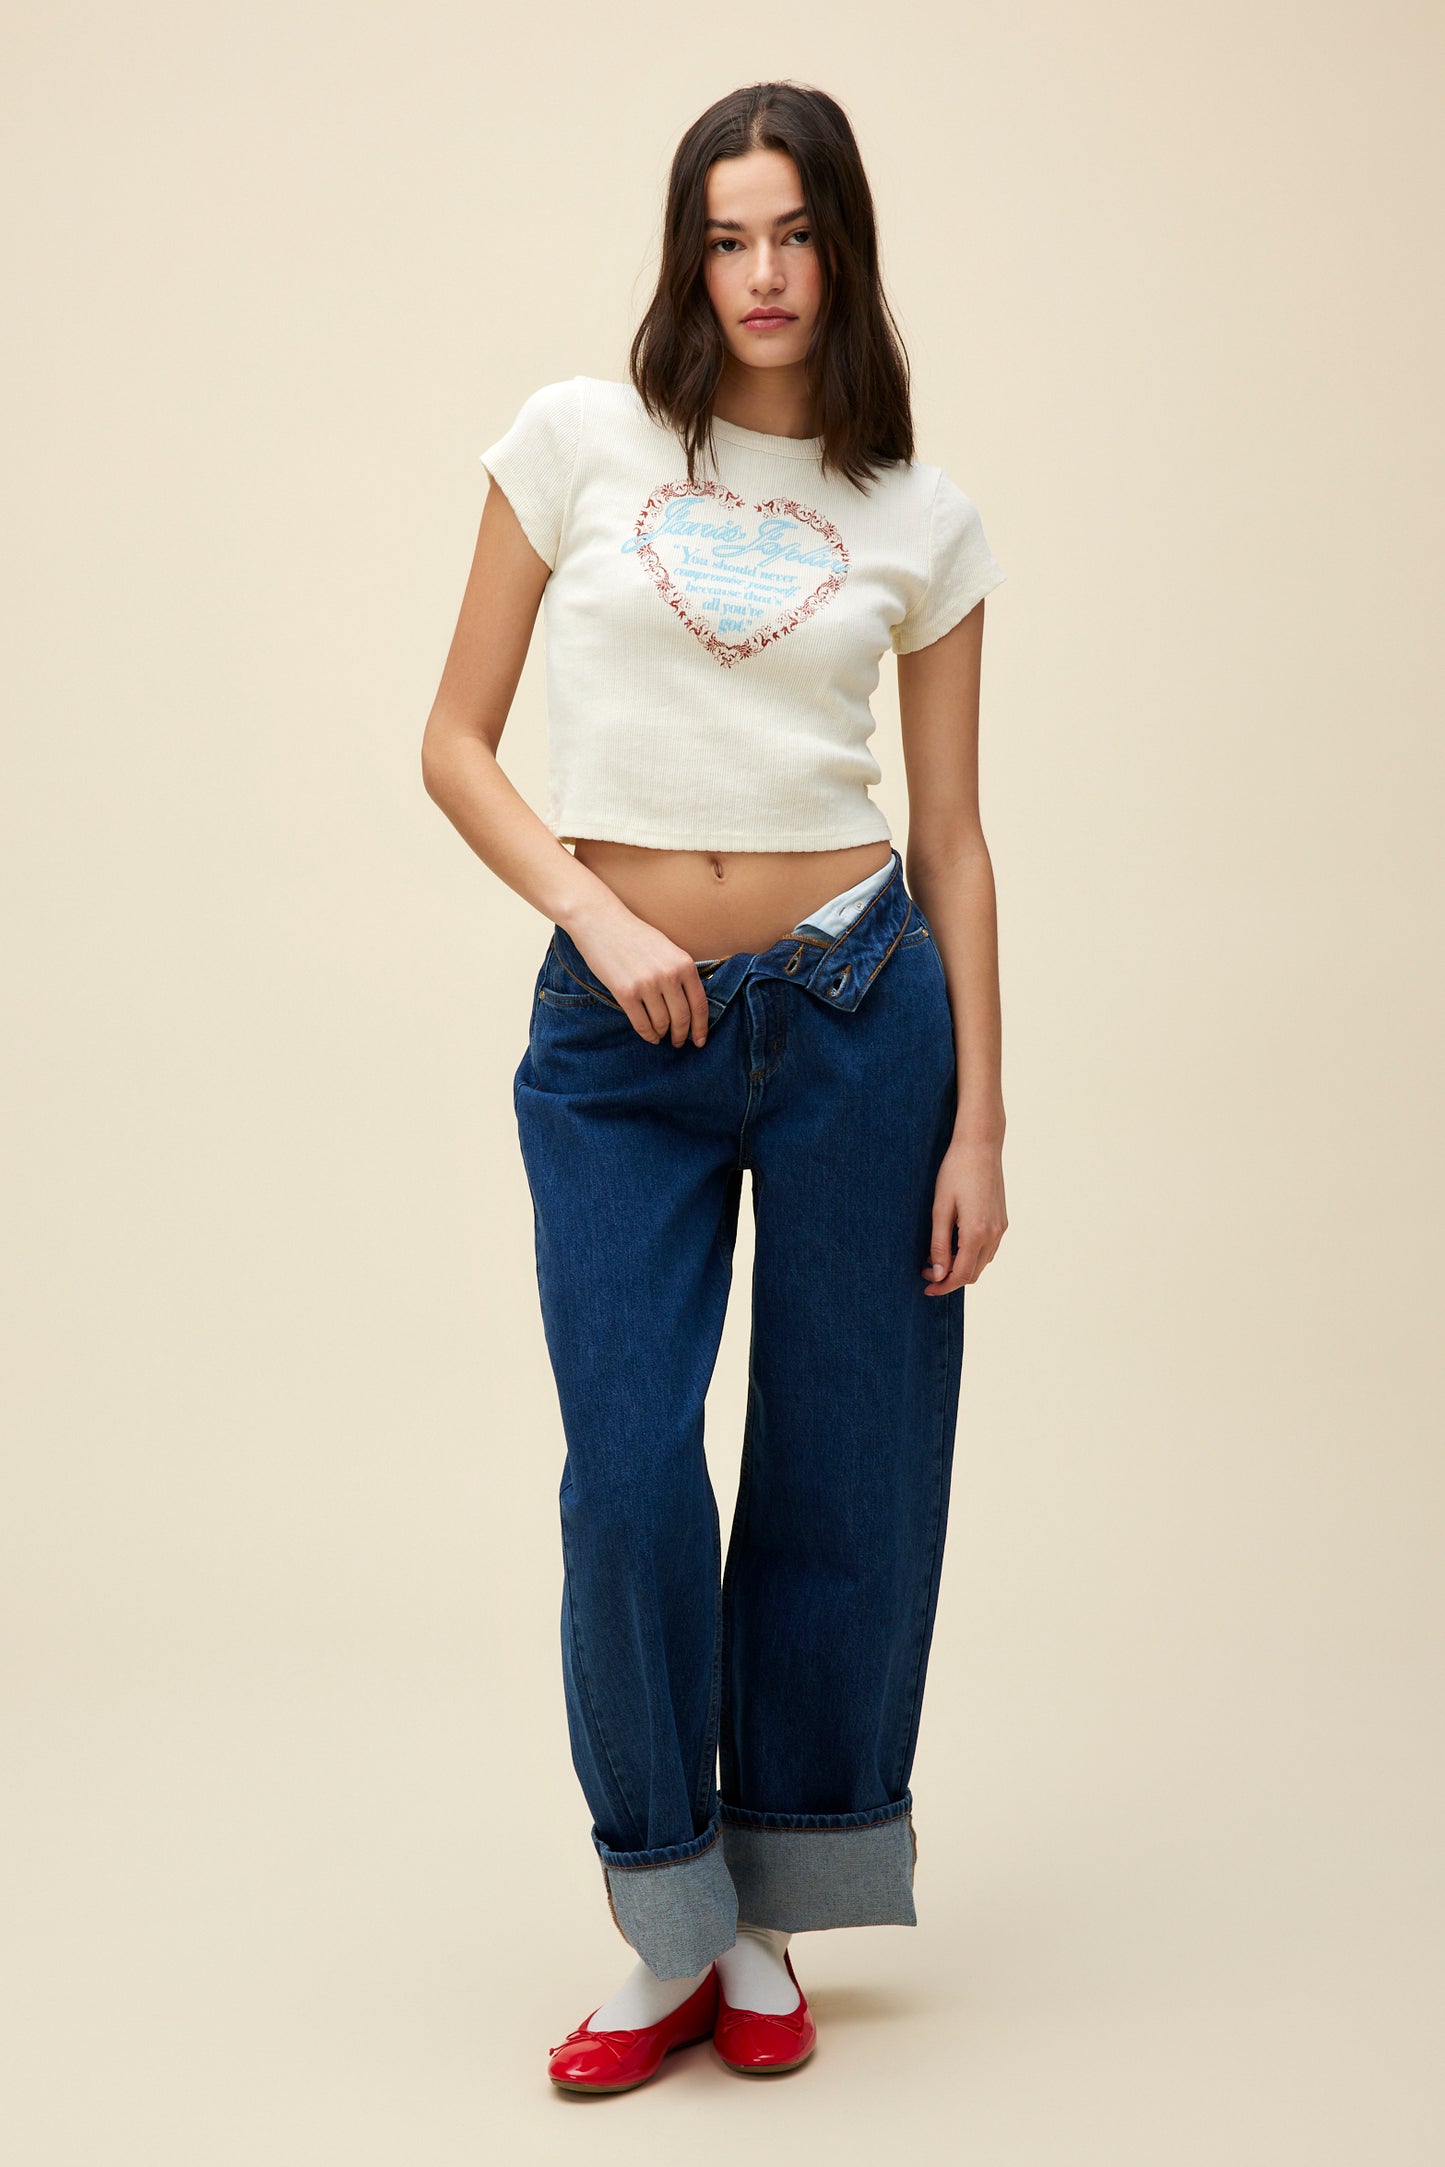 A model featuring a stone vintage baby tee featuring a red lace heart with Janis Joplin’s legendary ‘never compromise’ quote written in blue on the center. 